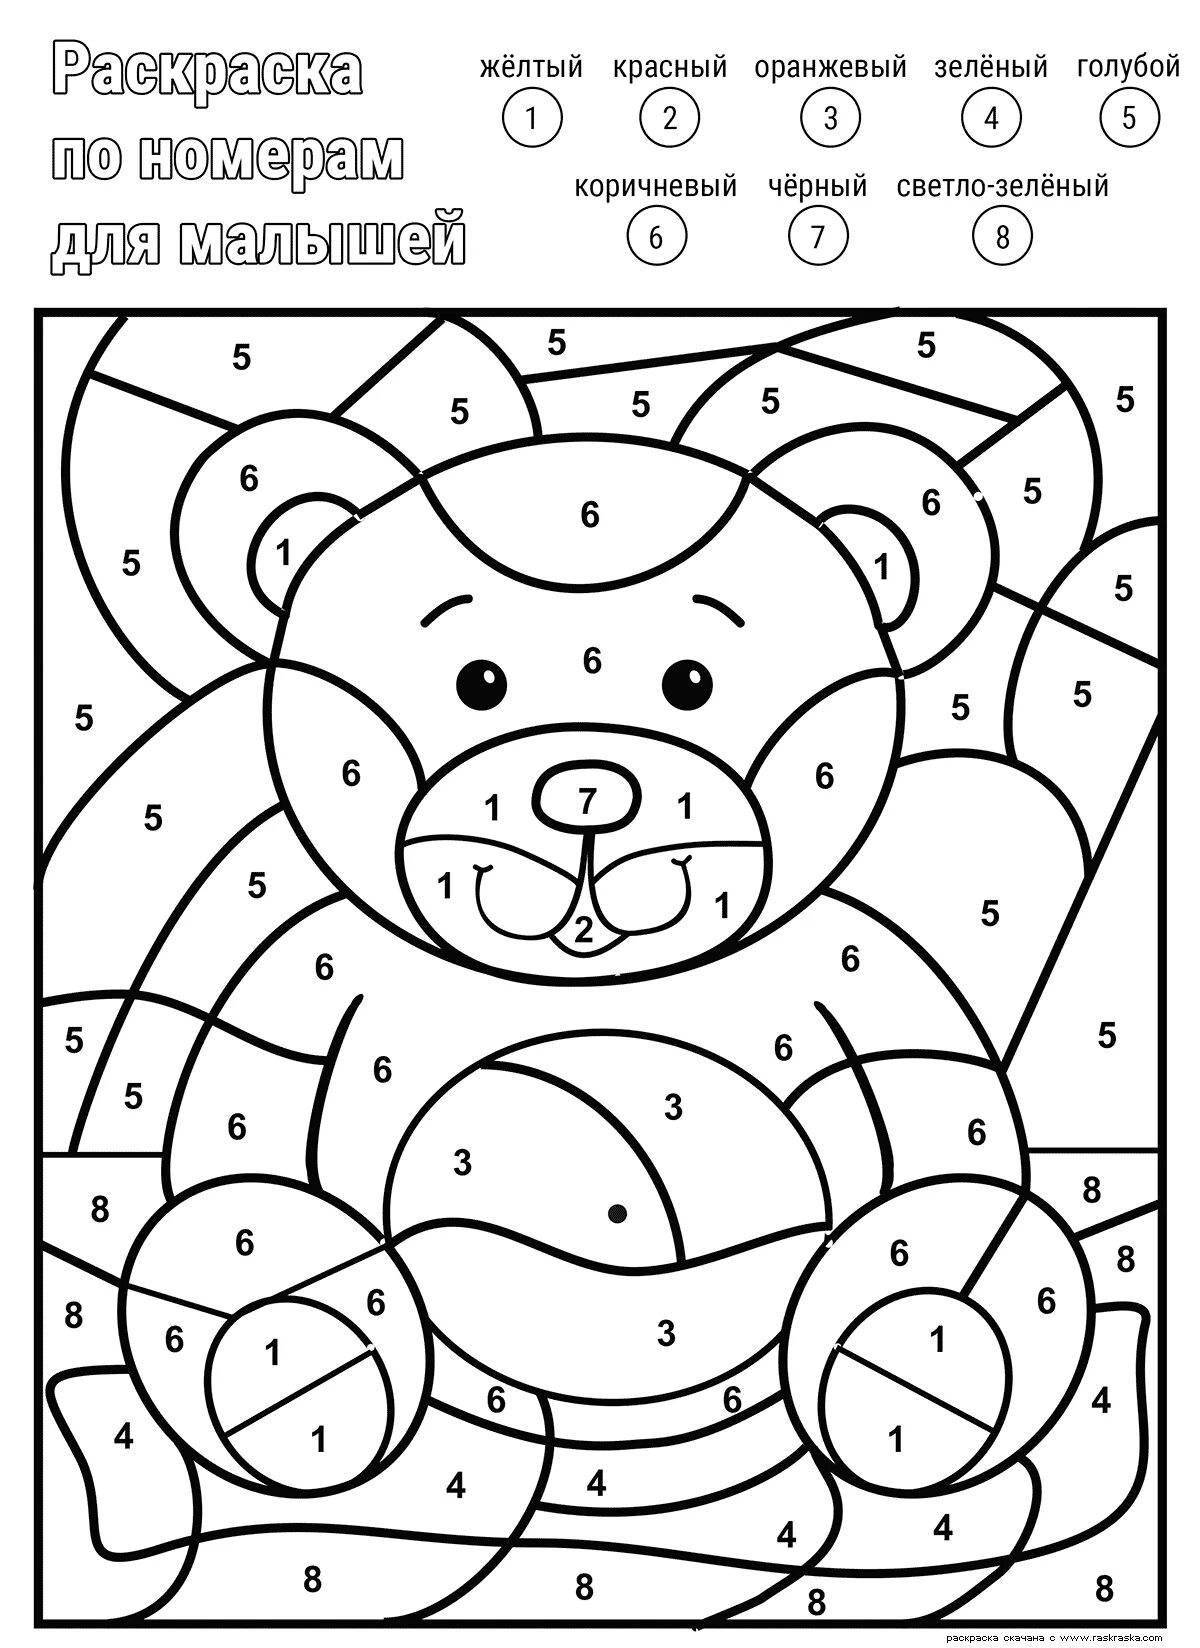 Fun coloring by numbers Grade 3